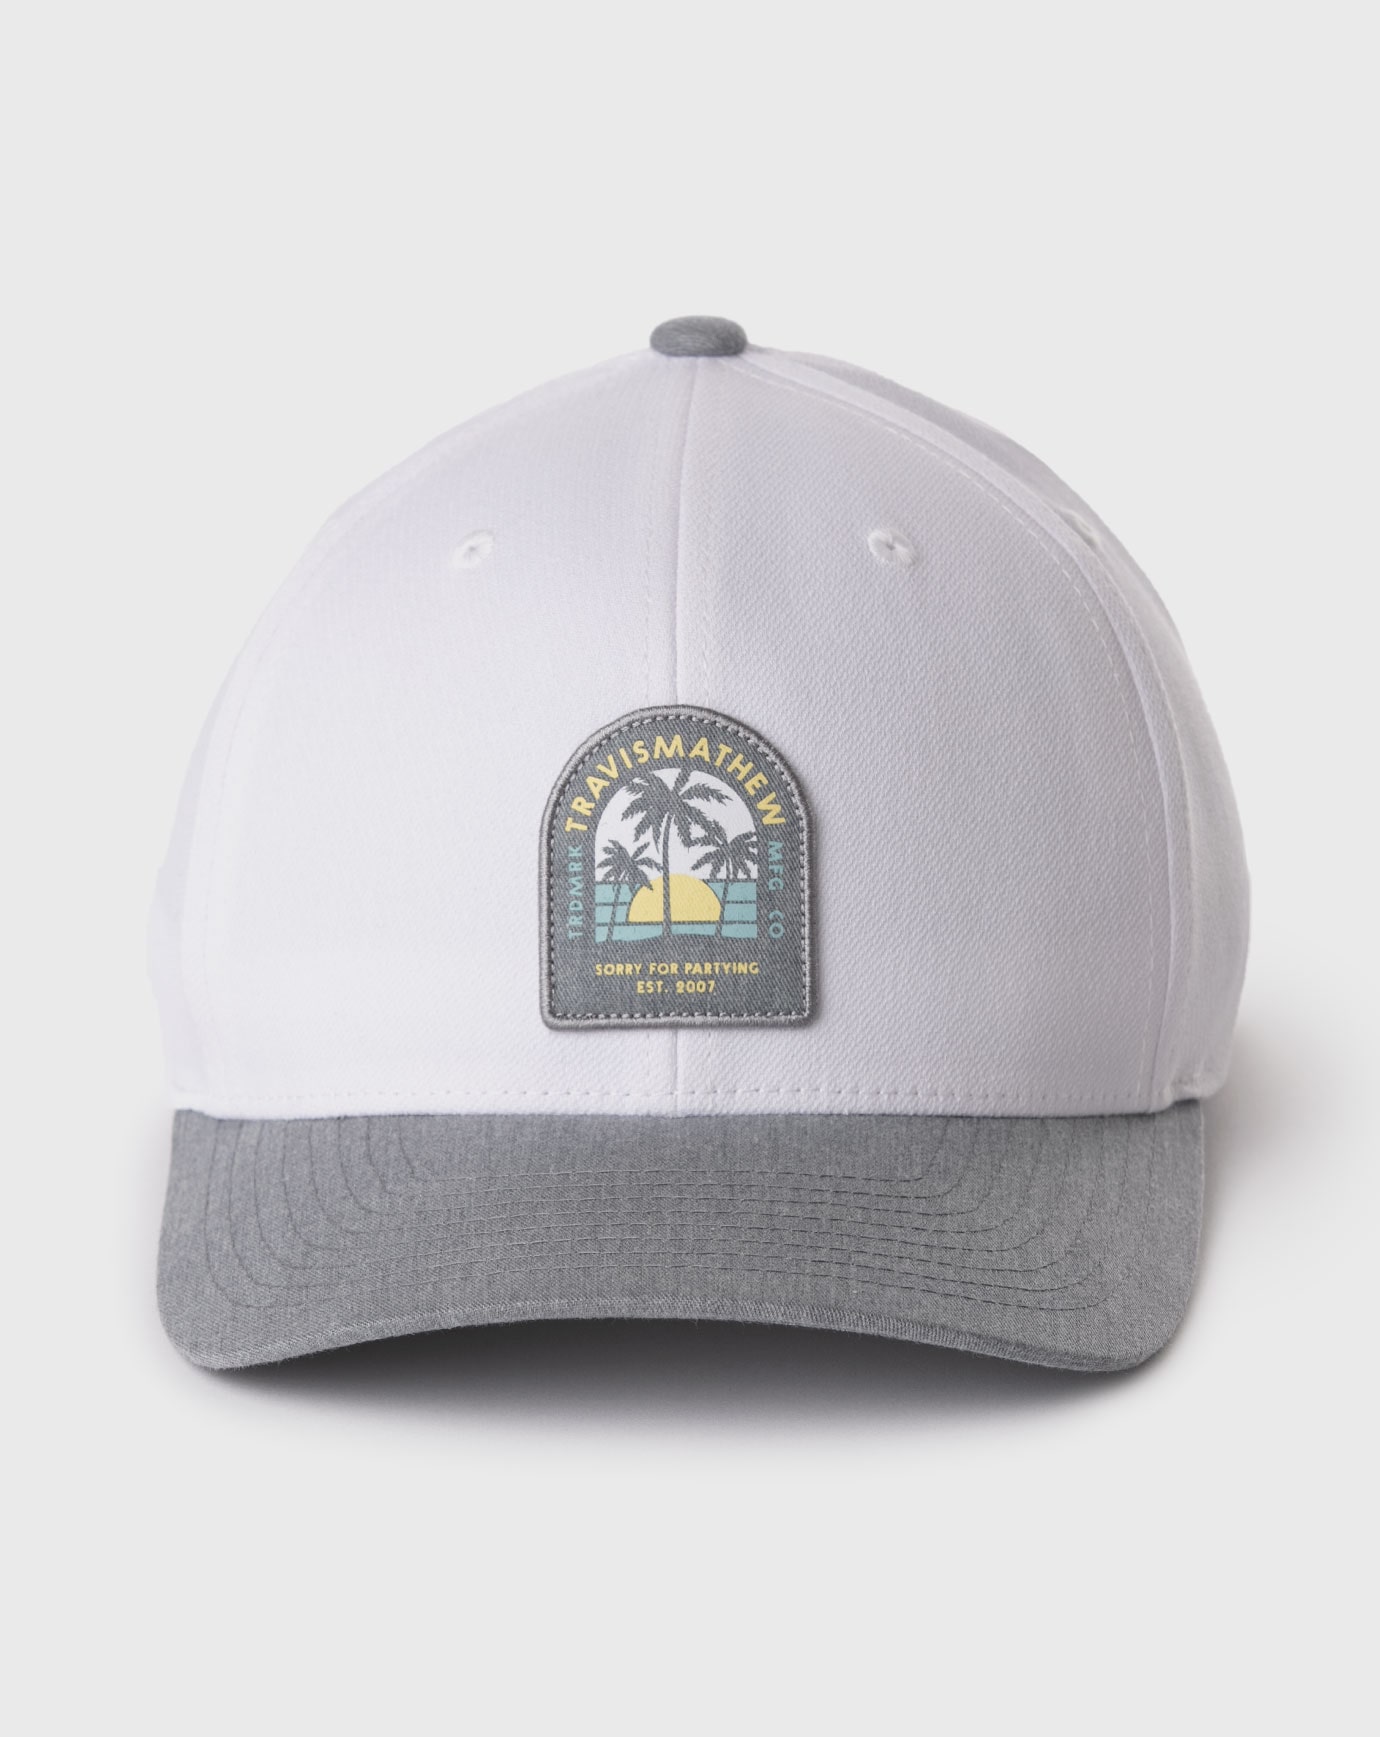 SHIP OUT SNAPBACK HAT